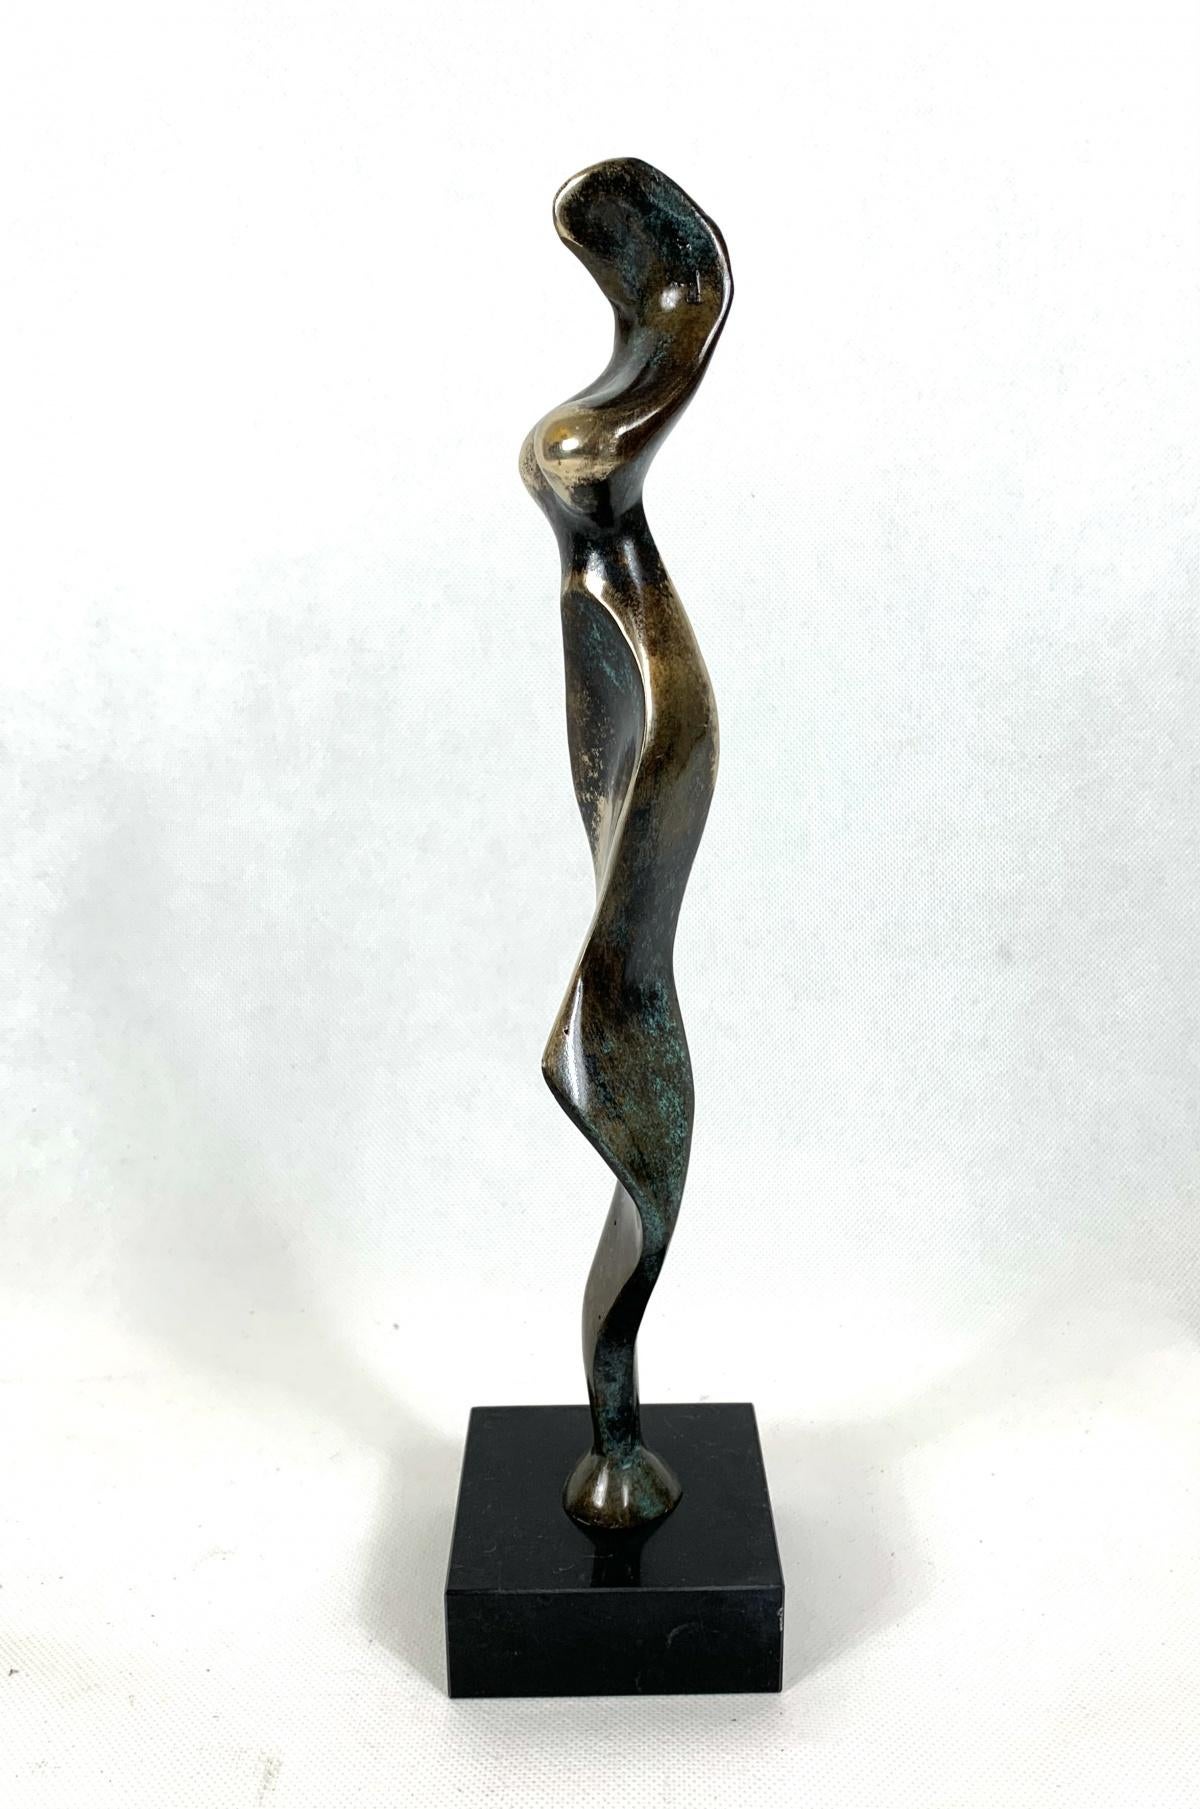 Nude - XXI century Contemporary bronze sculpture, Abstract & figurative - Gold Abstract Sculpture by Stanisław Wysocki